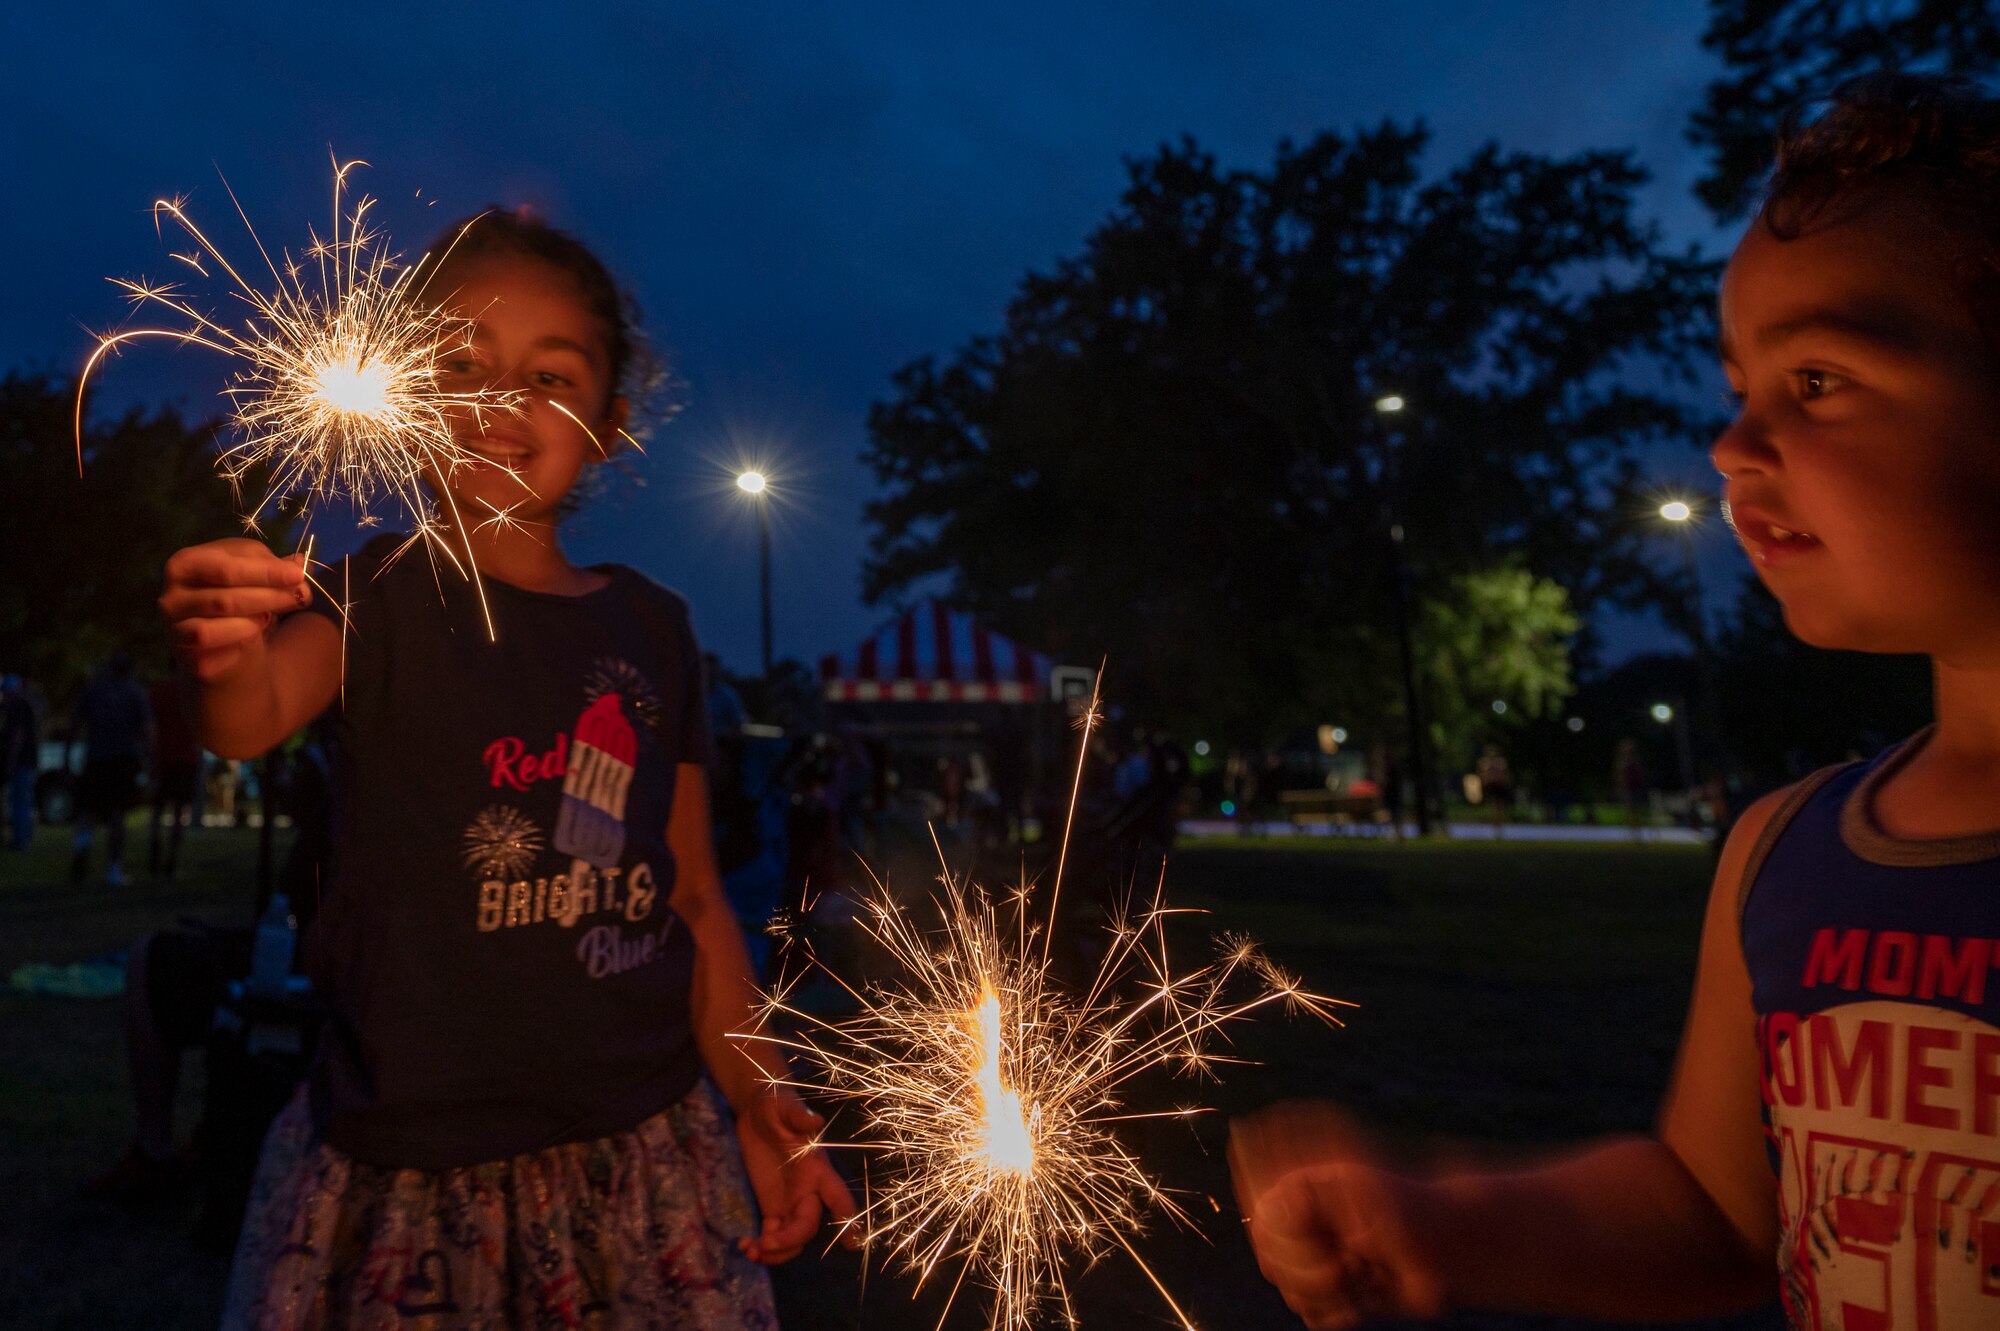 Members of Team Seymour play with sparklers during a 4th of July celebration at Seymour Johnson Air Force Base, North Carolina, June 30, 2022.